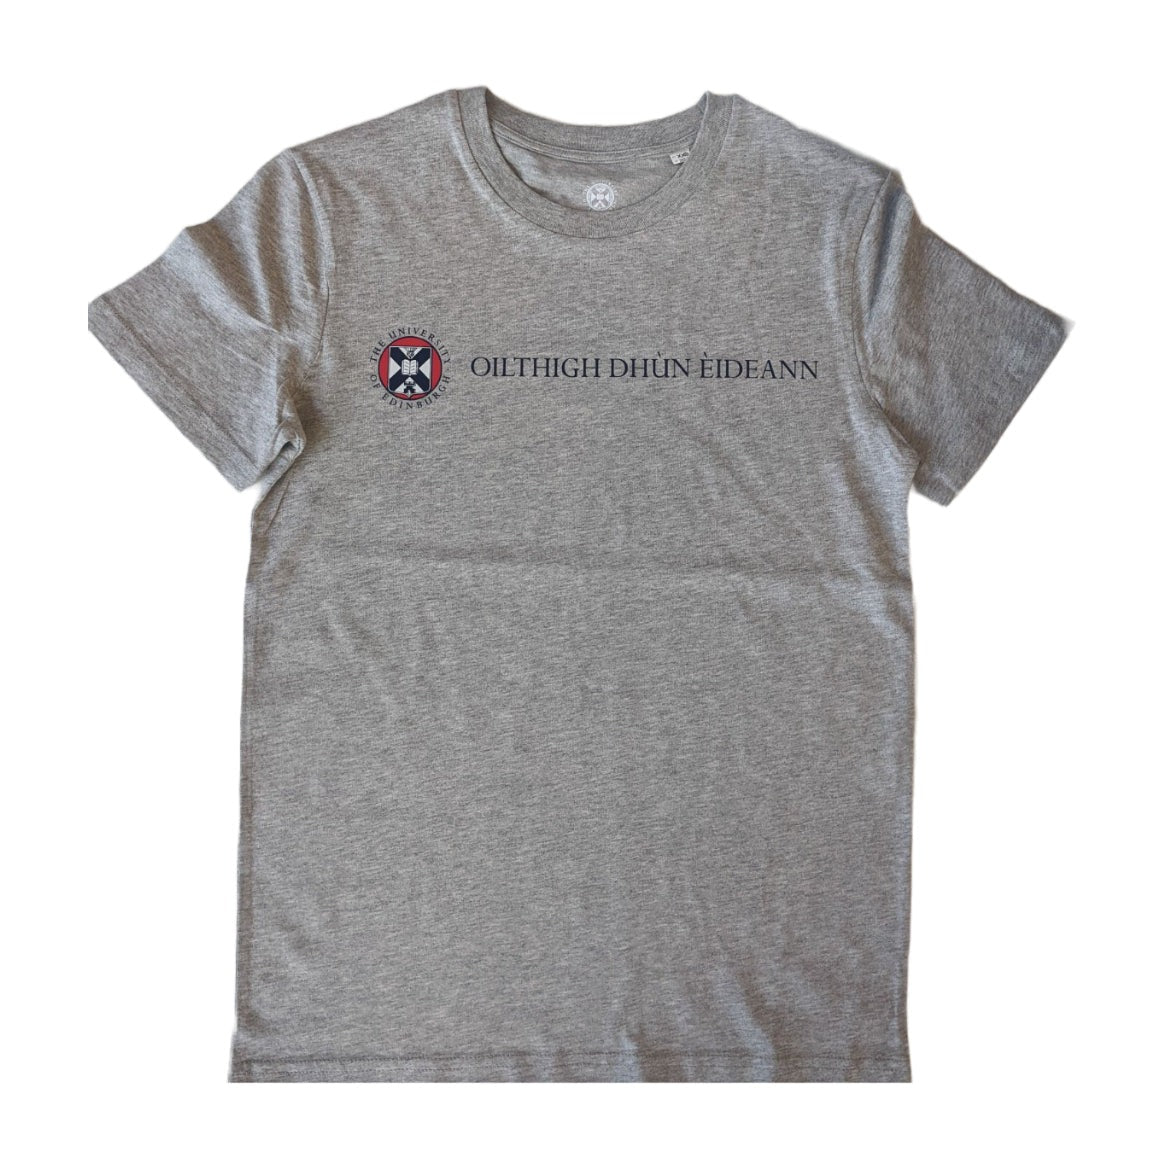 Grey t-shirt with the University name in Gaelic in navy print and university crest in navy red and white print